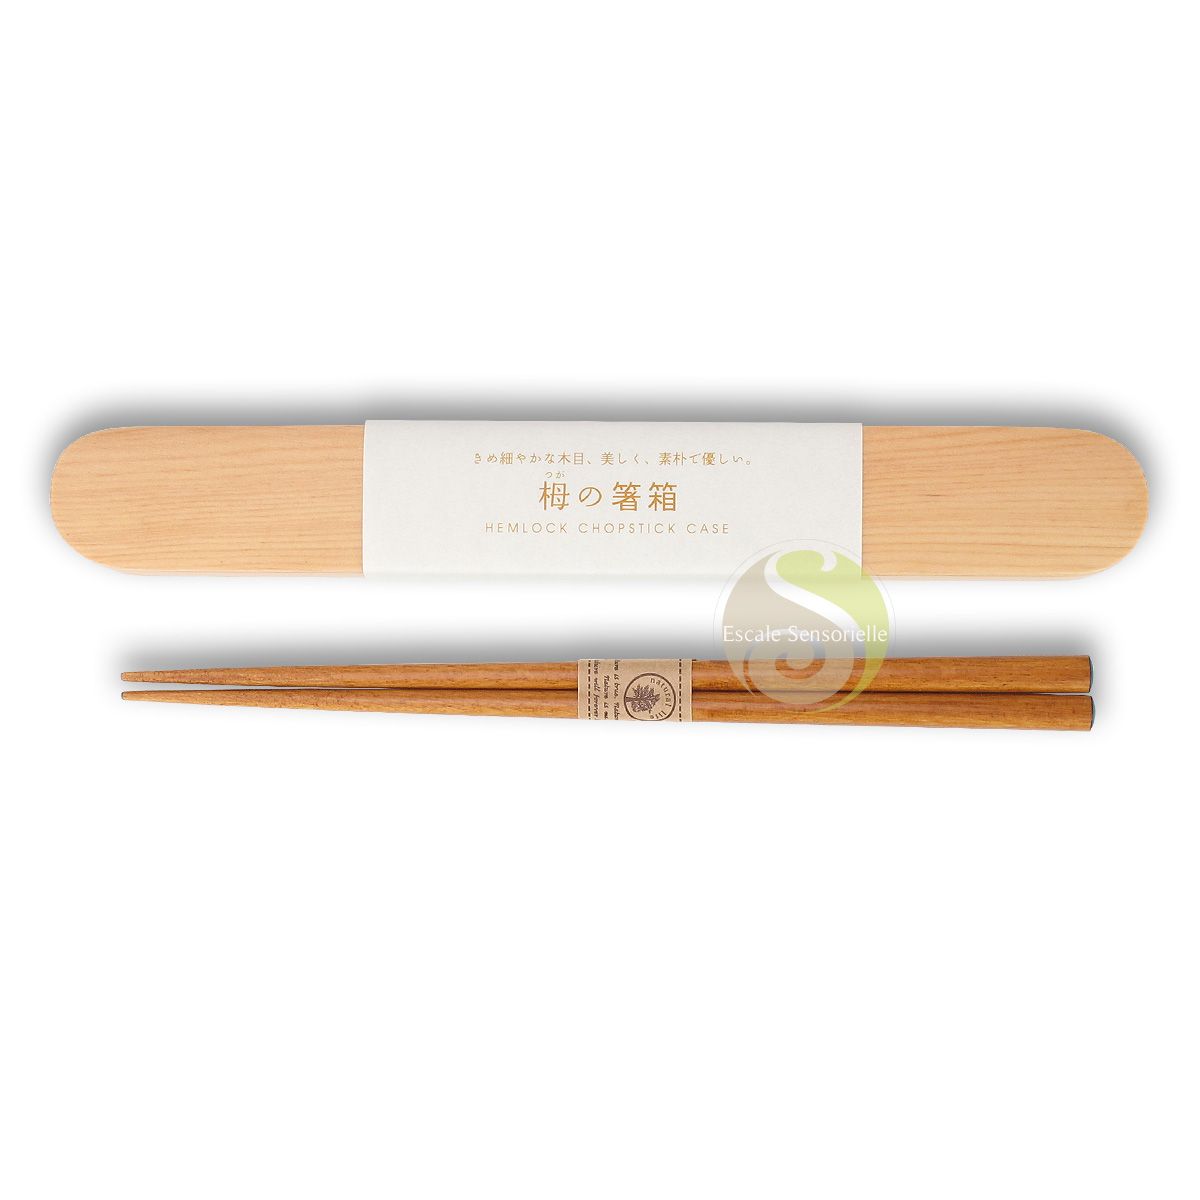 Hemlock chopstick case made in Japan protection and storage